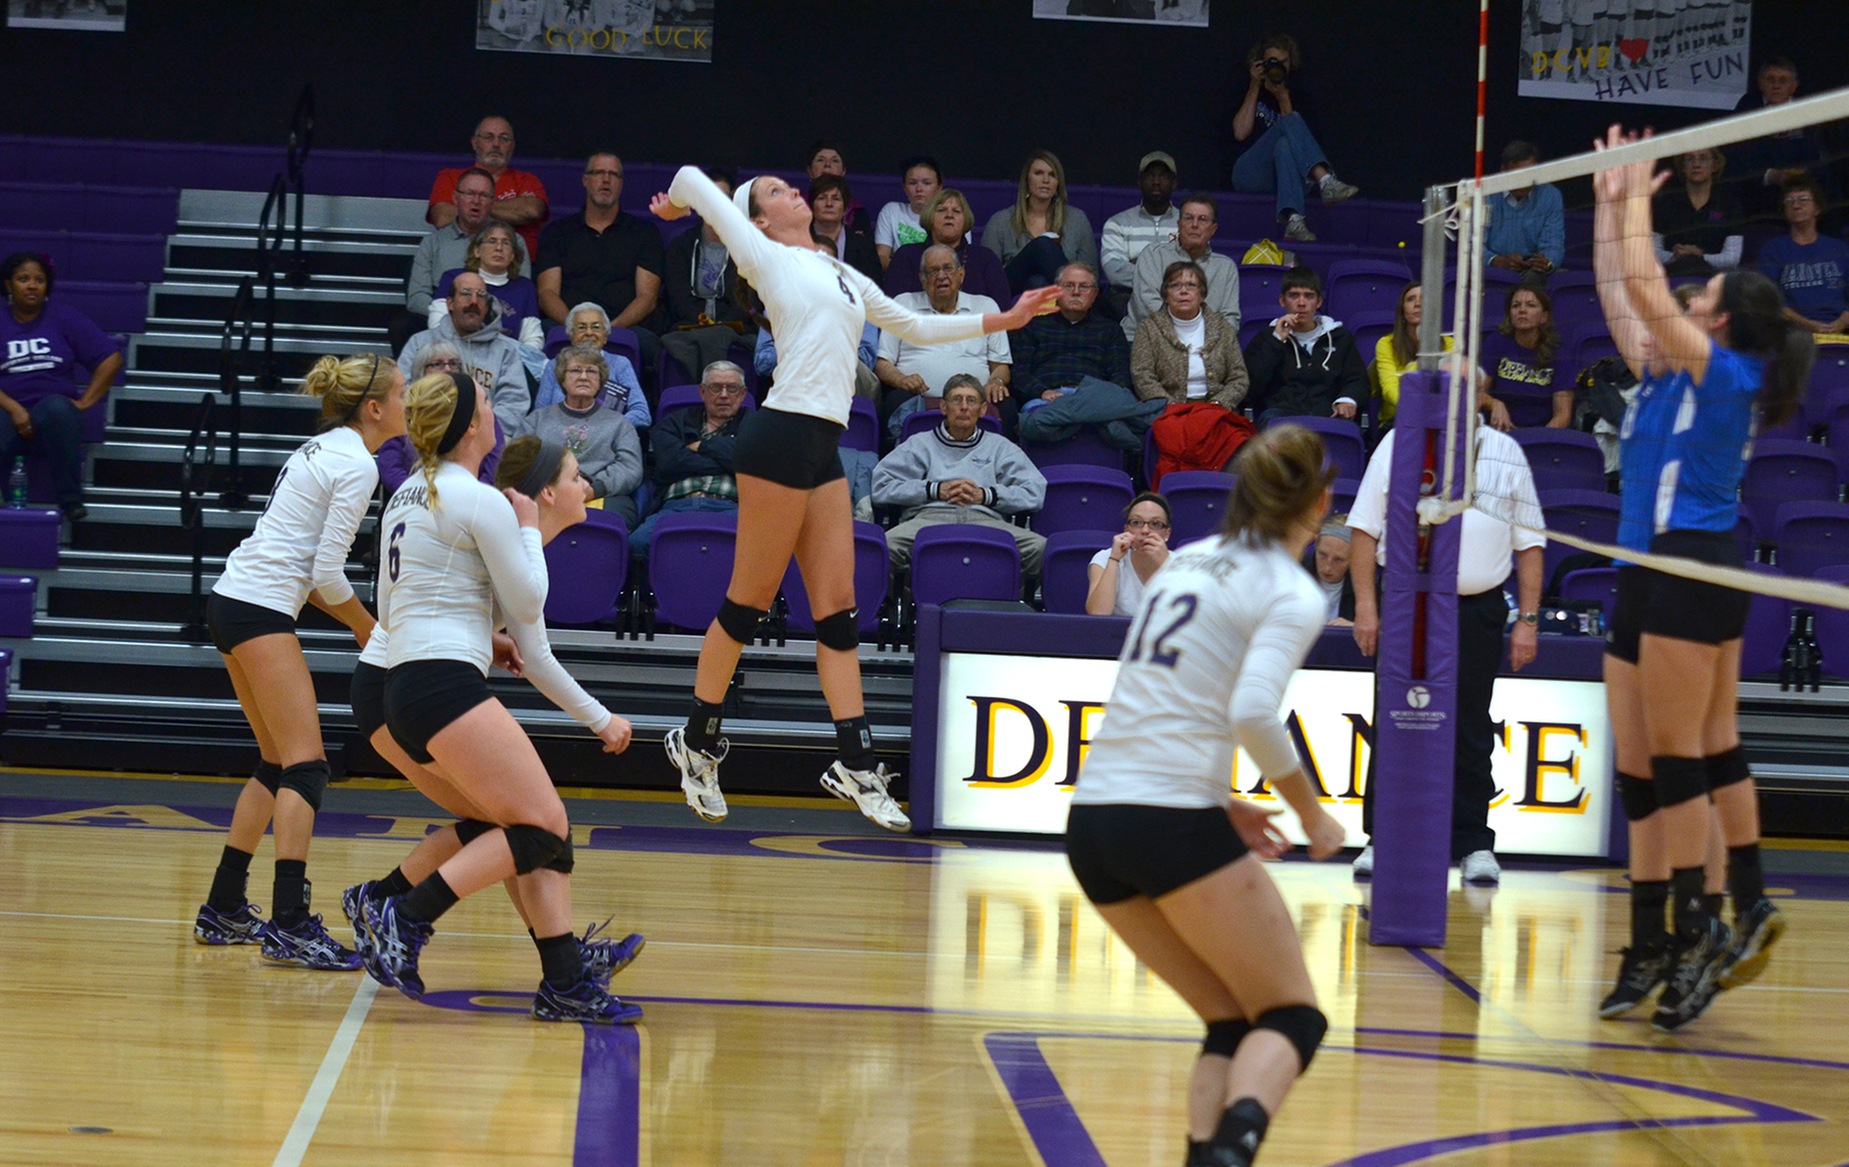 DC Volleyball Wins Thriller to Seal Berth into HCAC Semis